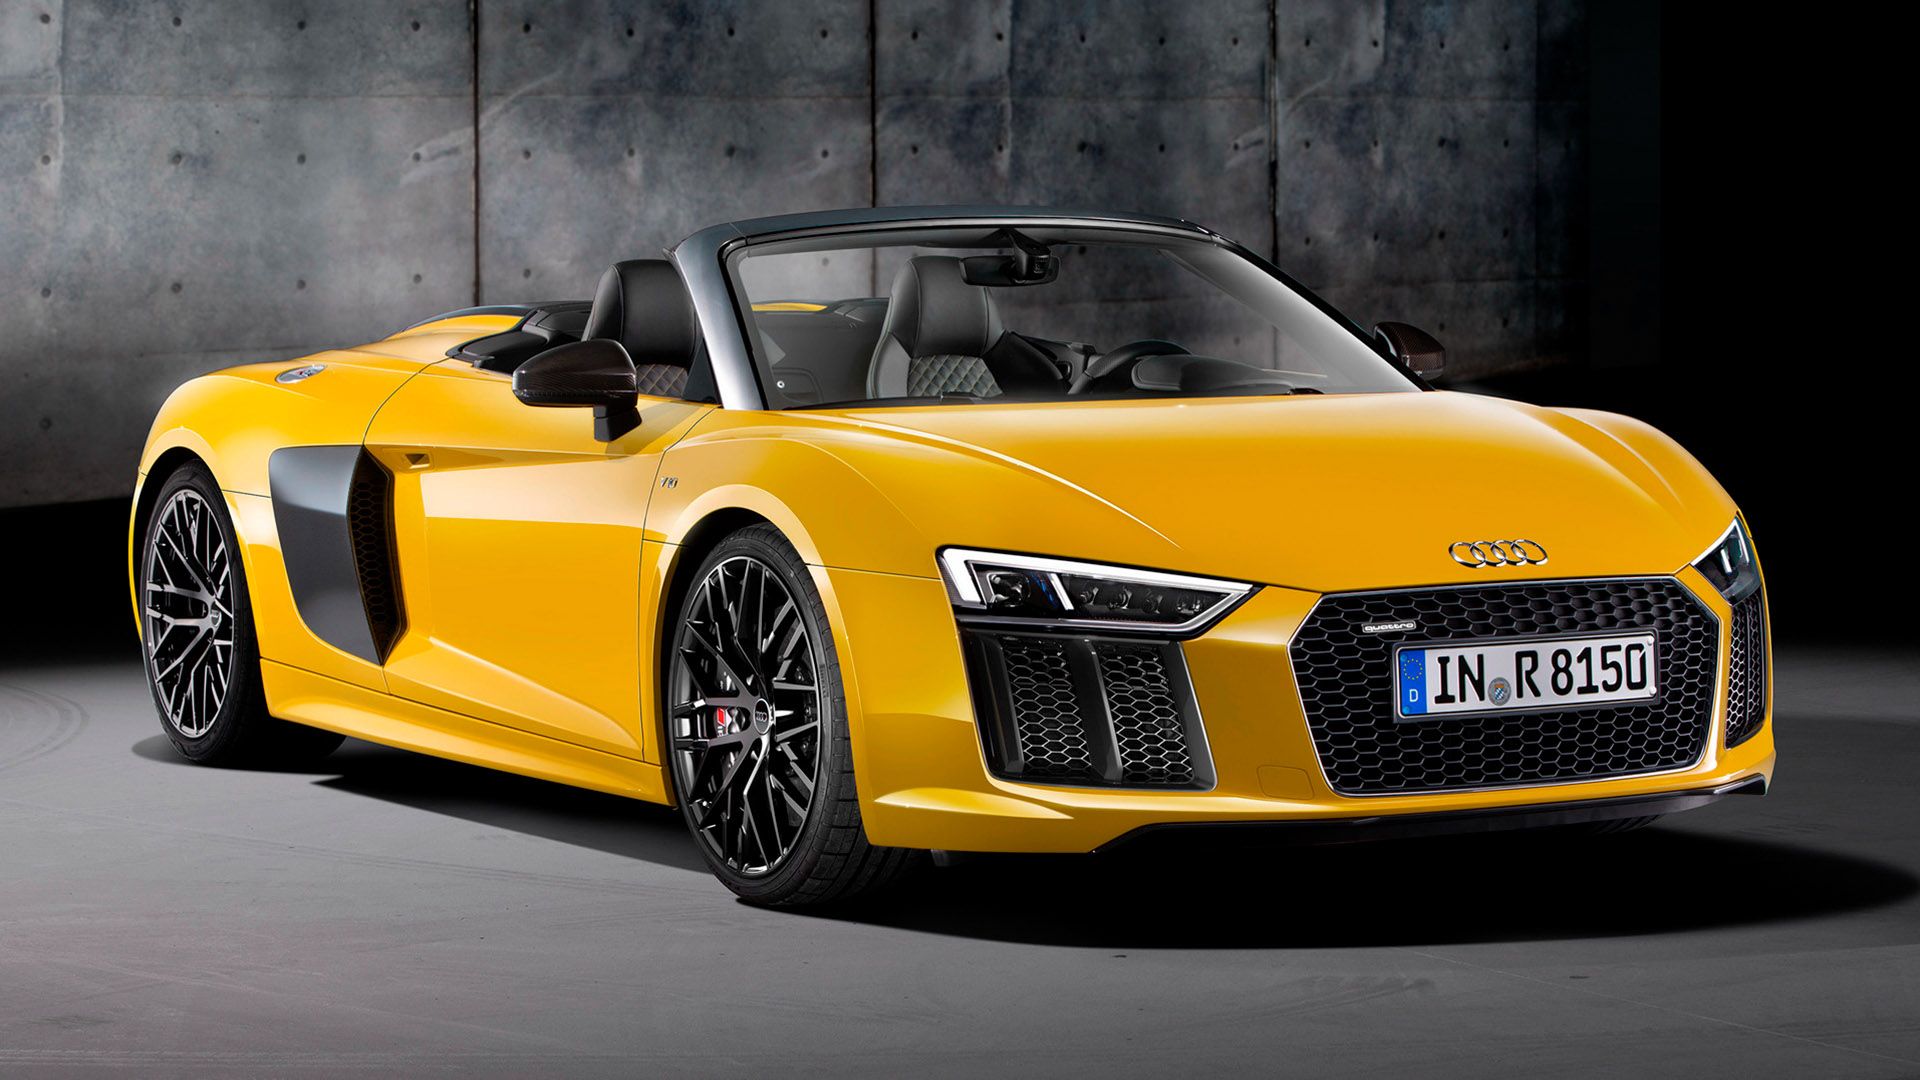 Yellow Audi R8 Spyder with open top in front of dark concrete wall